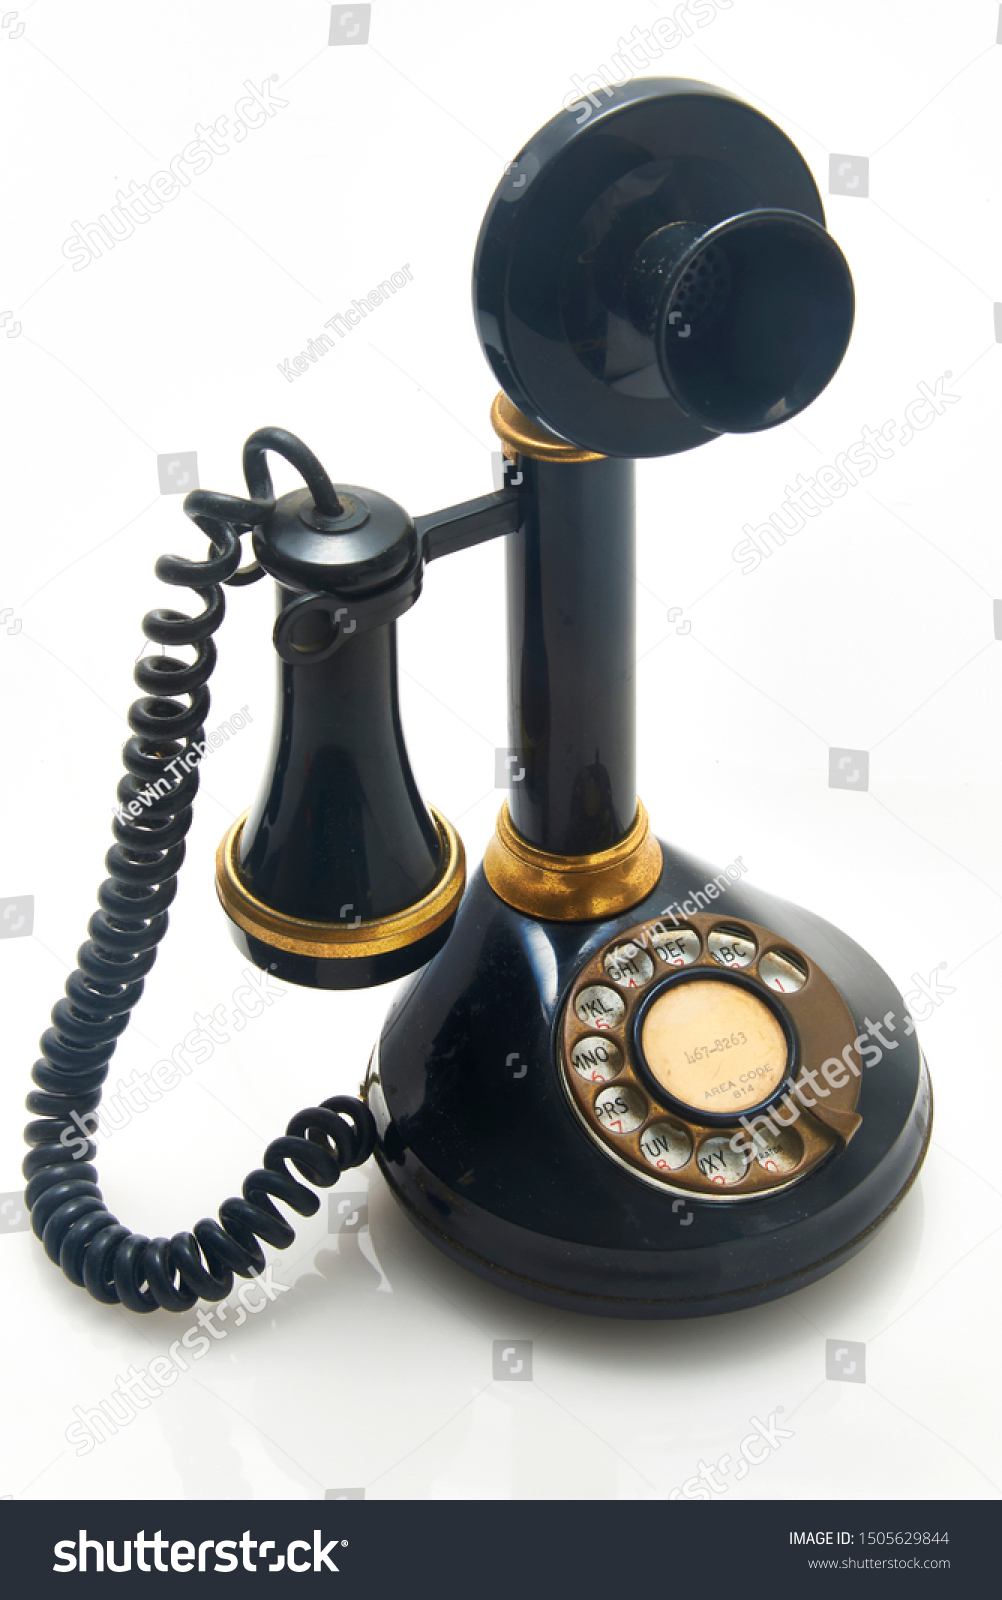 Details about   BRASS FULL WORKING CANDLESTICK ROTARY DIAL LANDLINE TELEPHONE BEST GIFT 